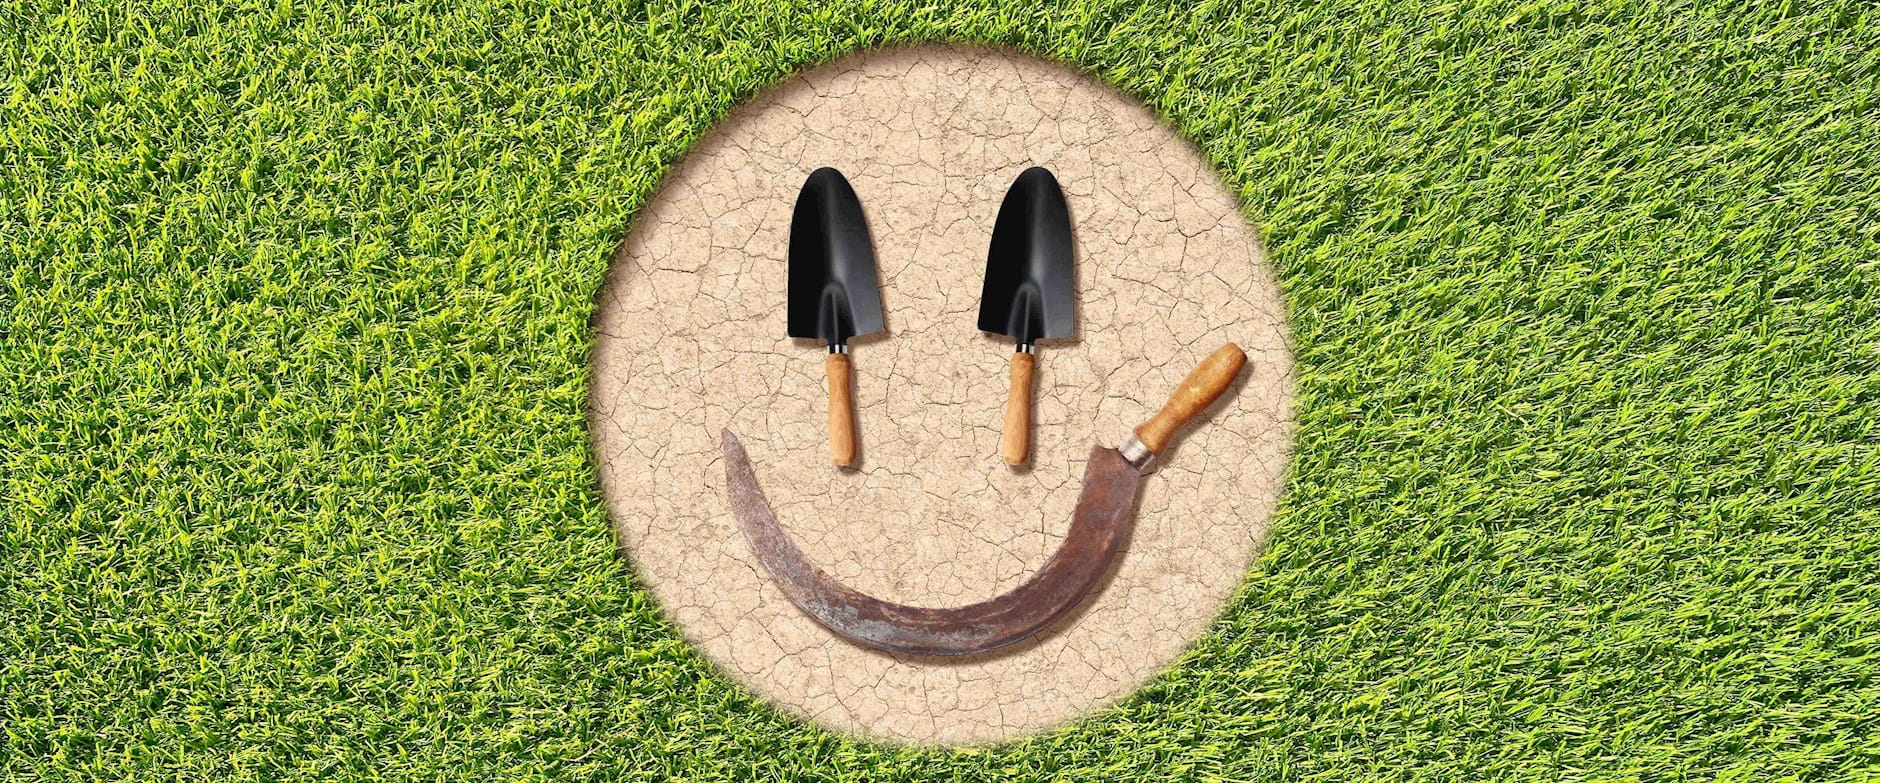 Smiley face from farming tools